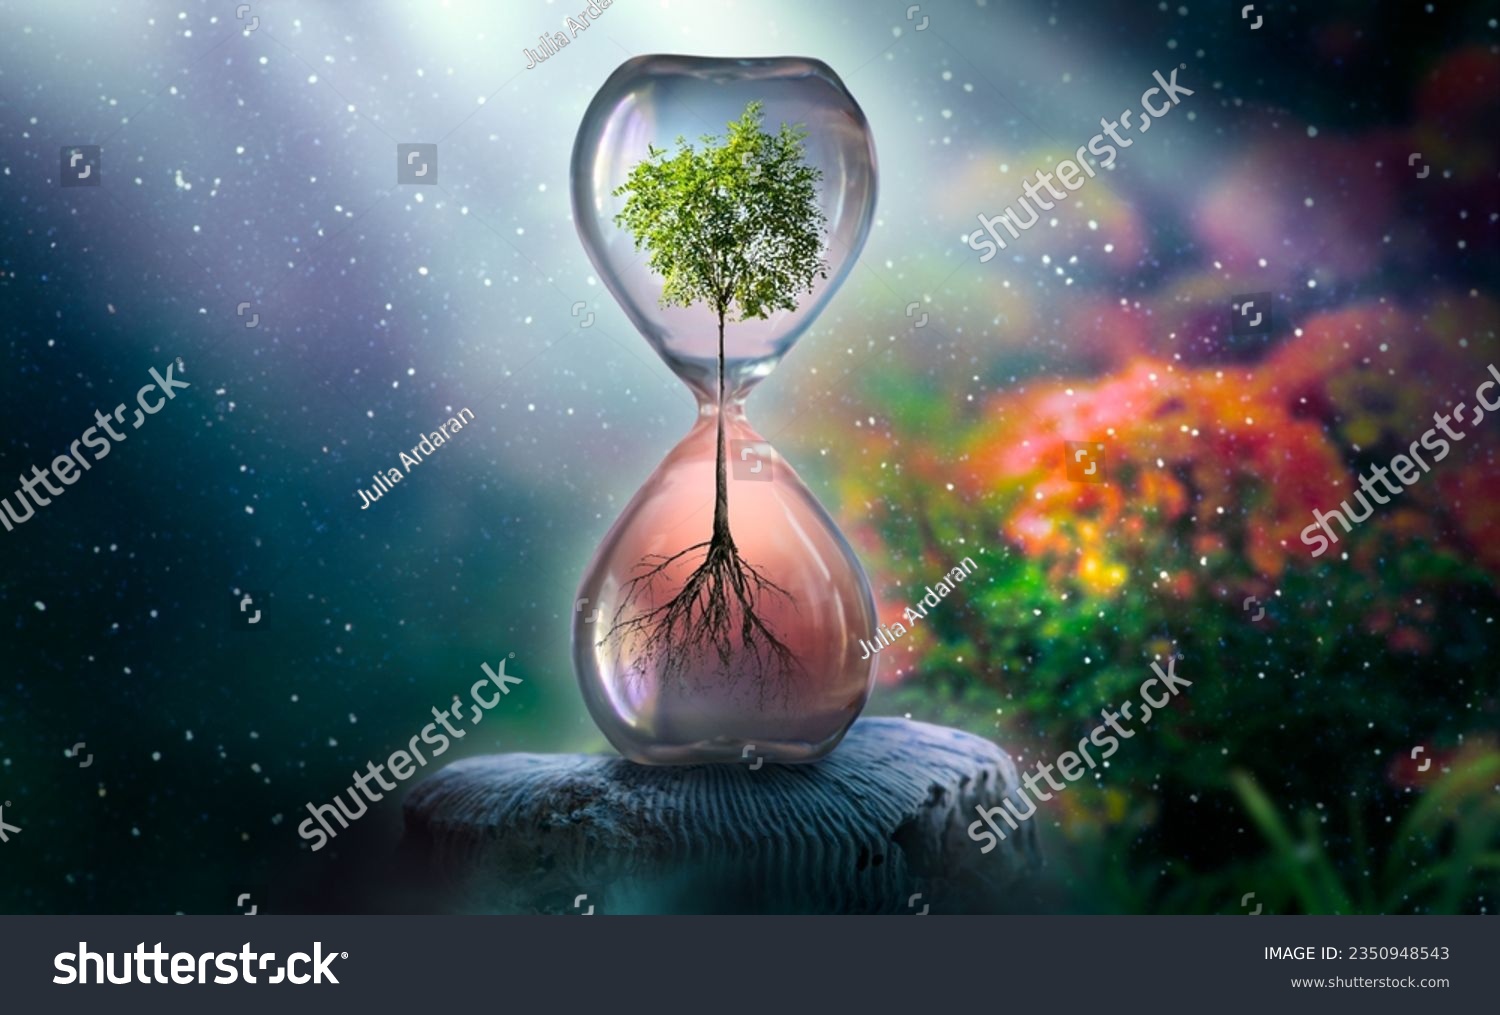 Earth Day or World Environment Day concept. Save our Planet and forest, restore and protect Green Nature, global warming and Climate change theme. Live and dry tree in Hourglass in garden. #2350948543